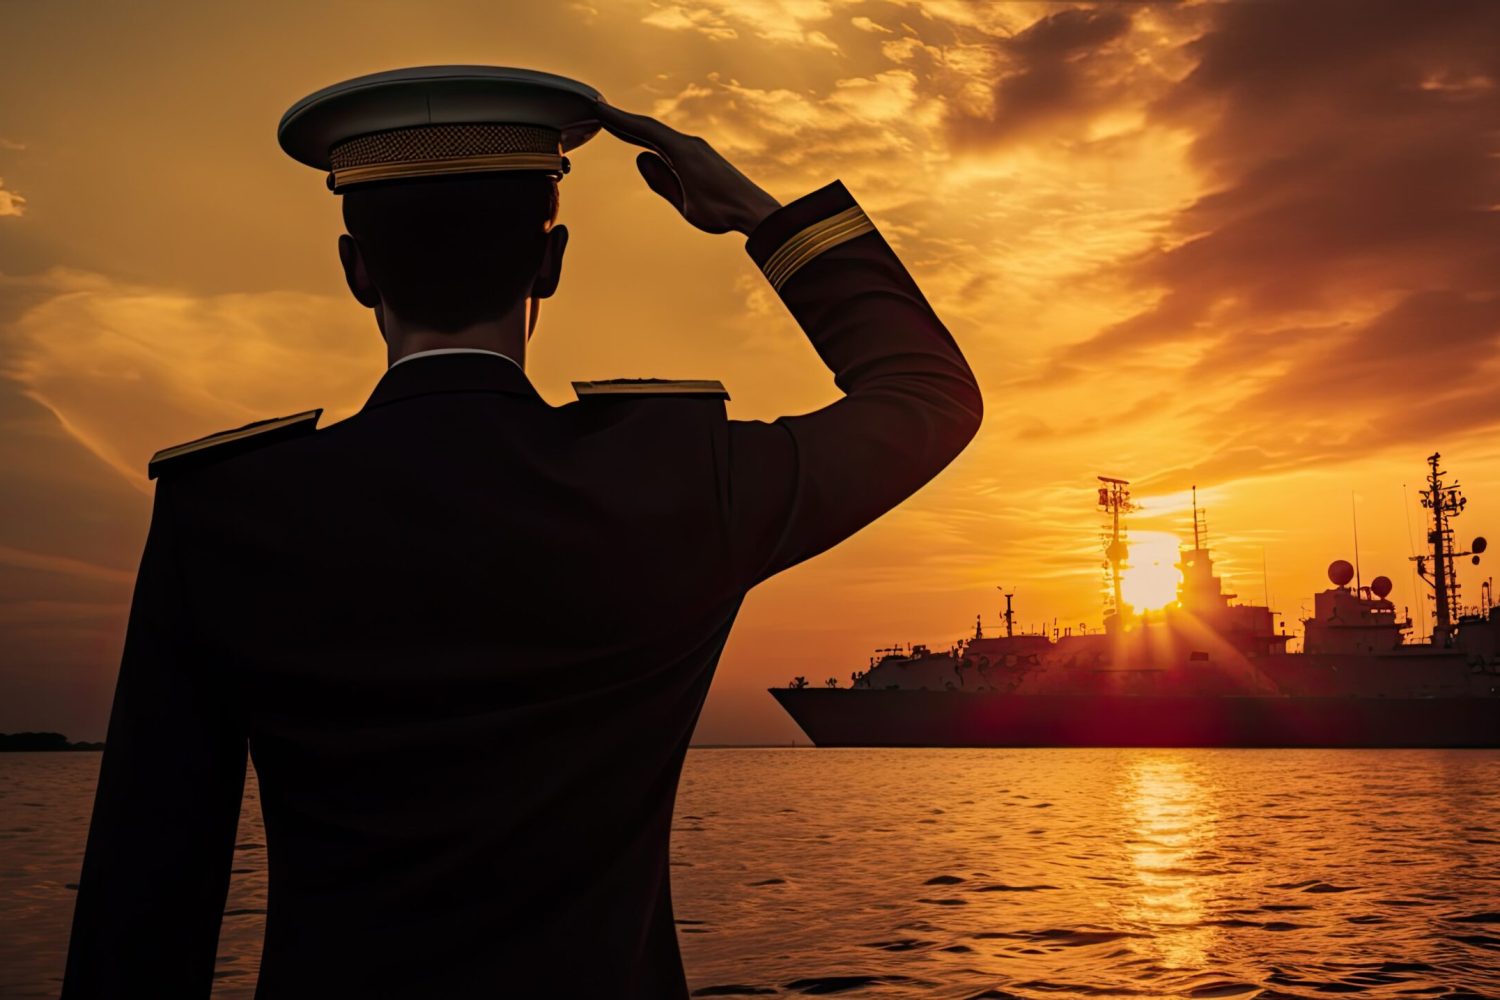 Captain silhouetted against sunset in a digital composite